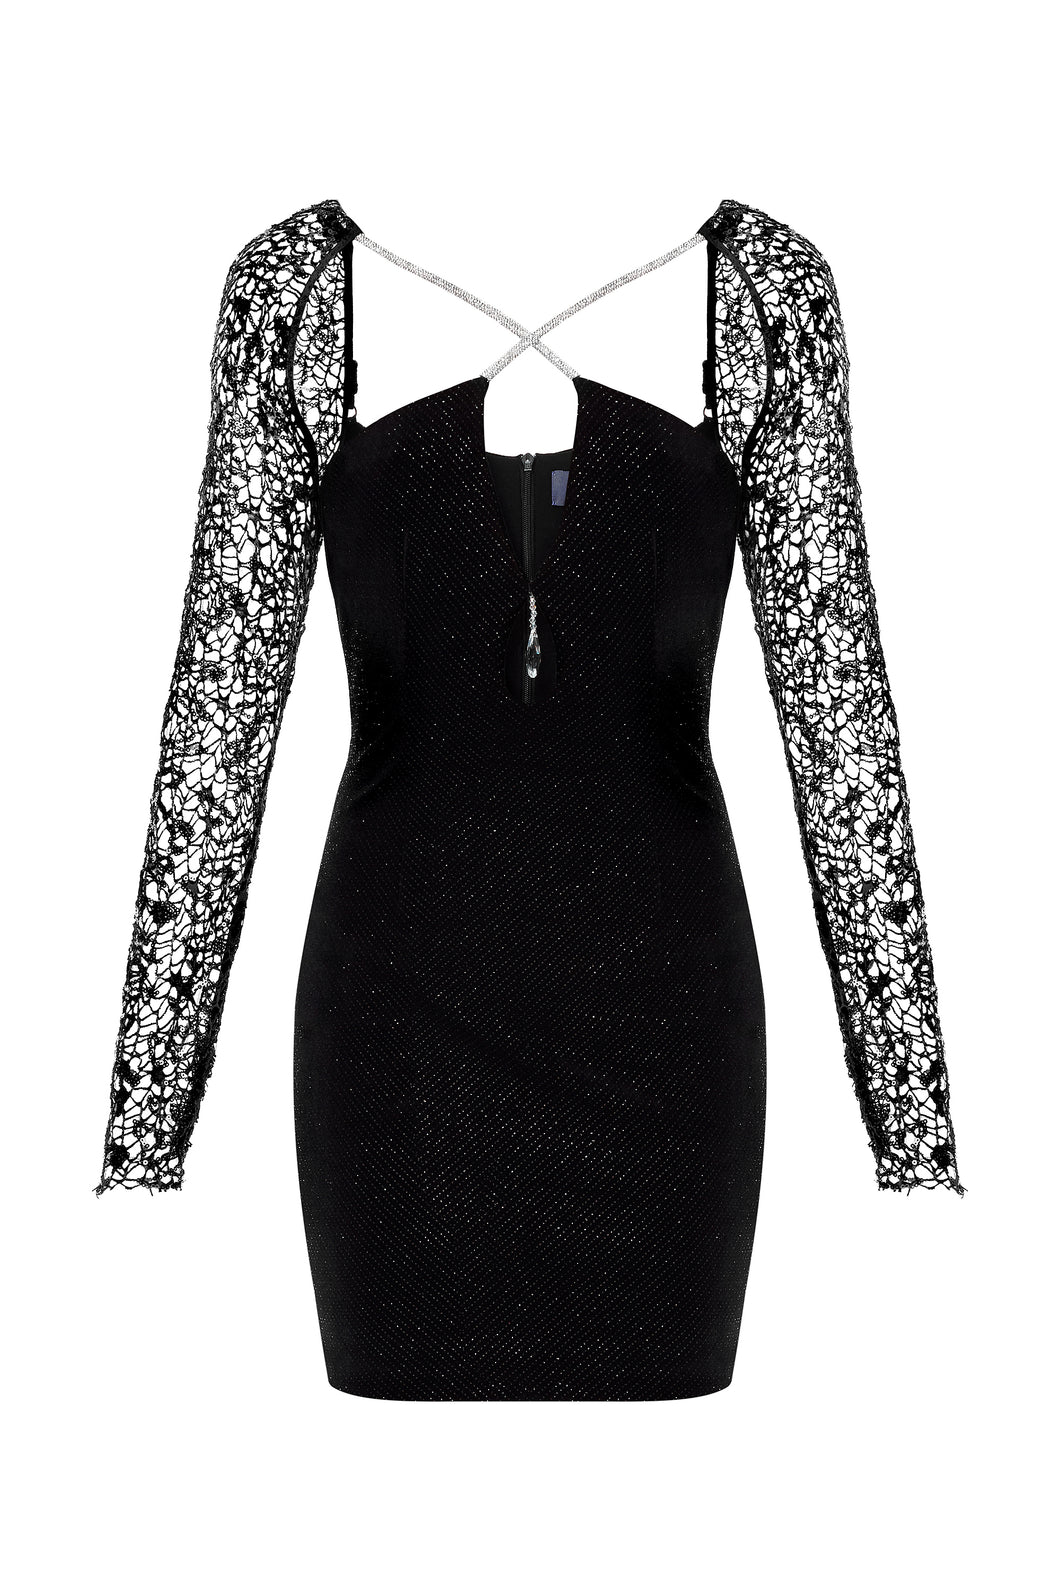 SHINY VELVET DRESS WITH CRYSTAL COD AND SEQUINS MESH SLEEVES